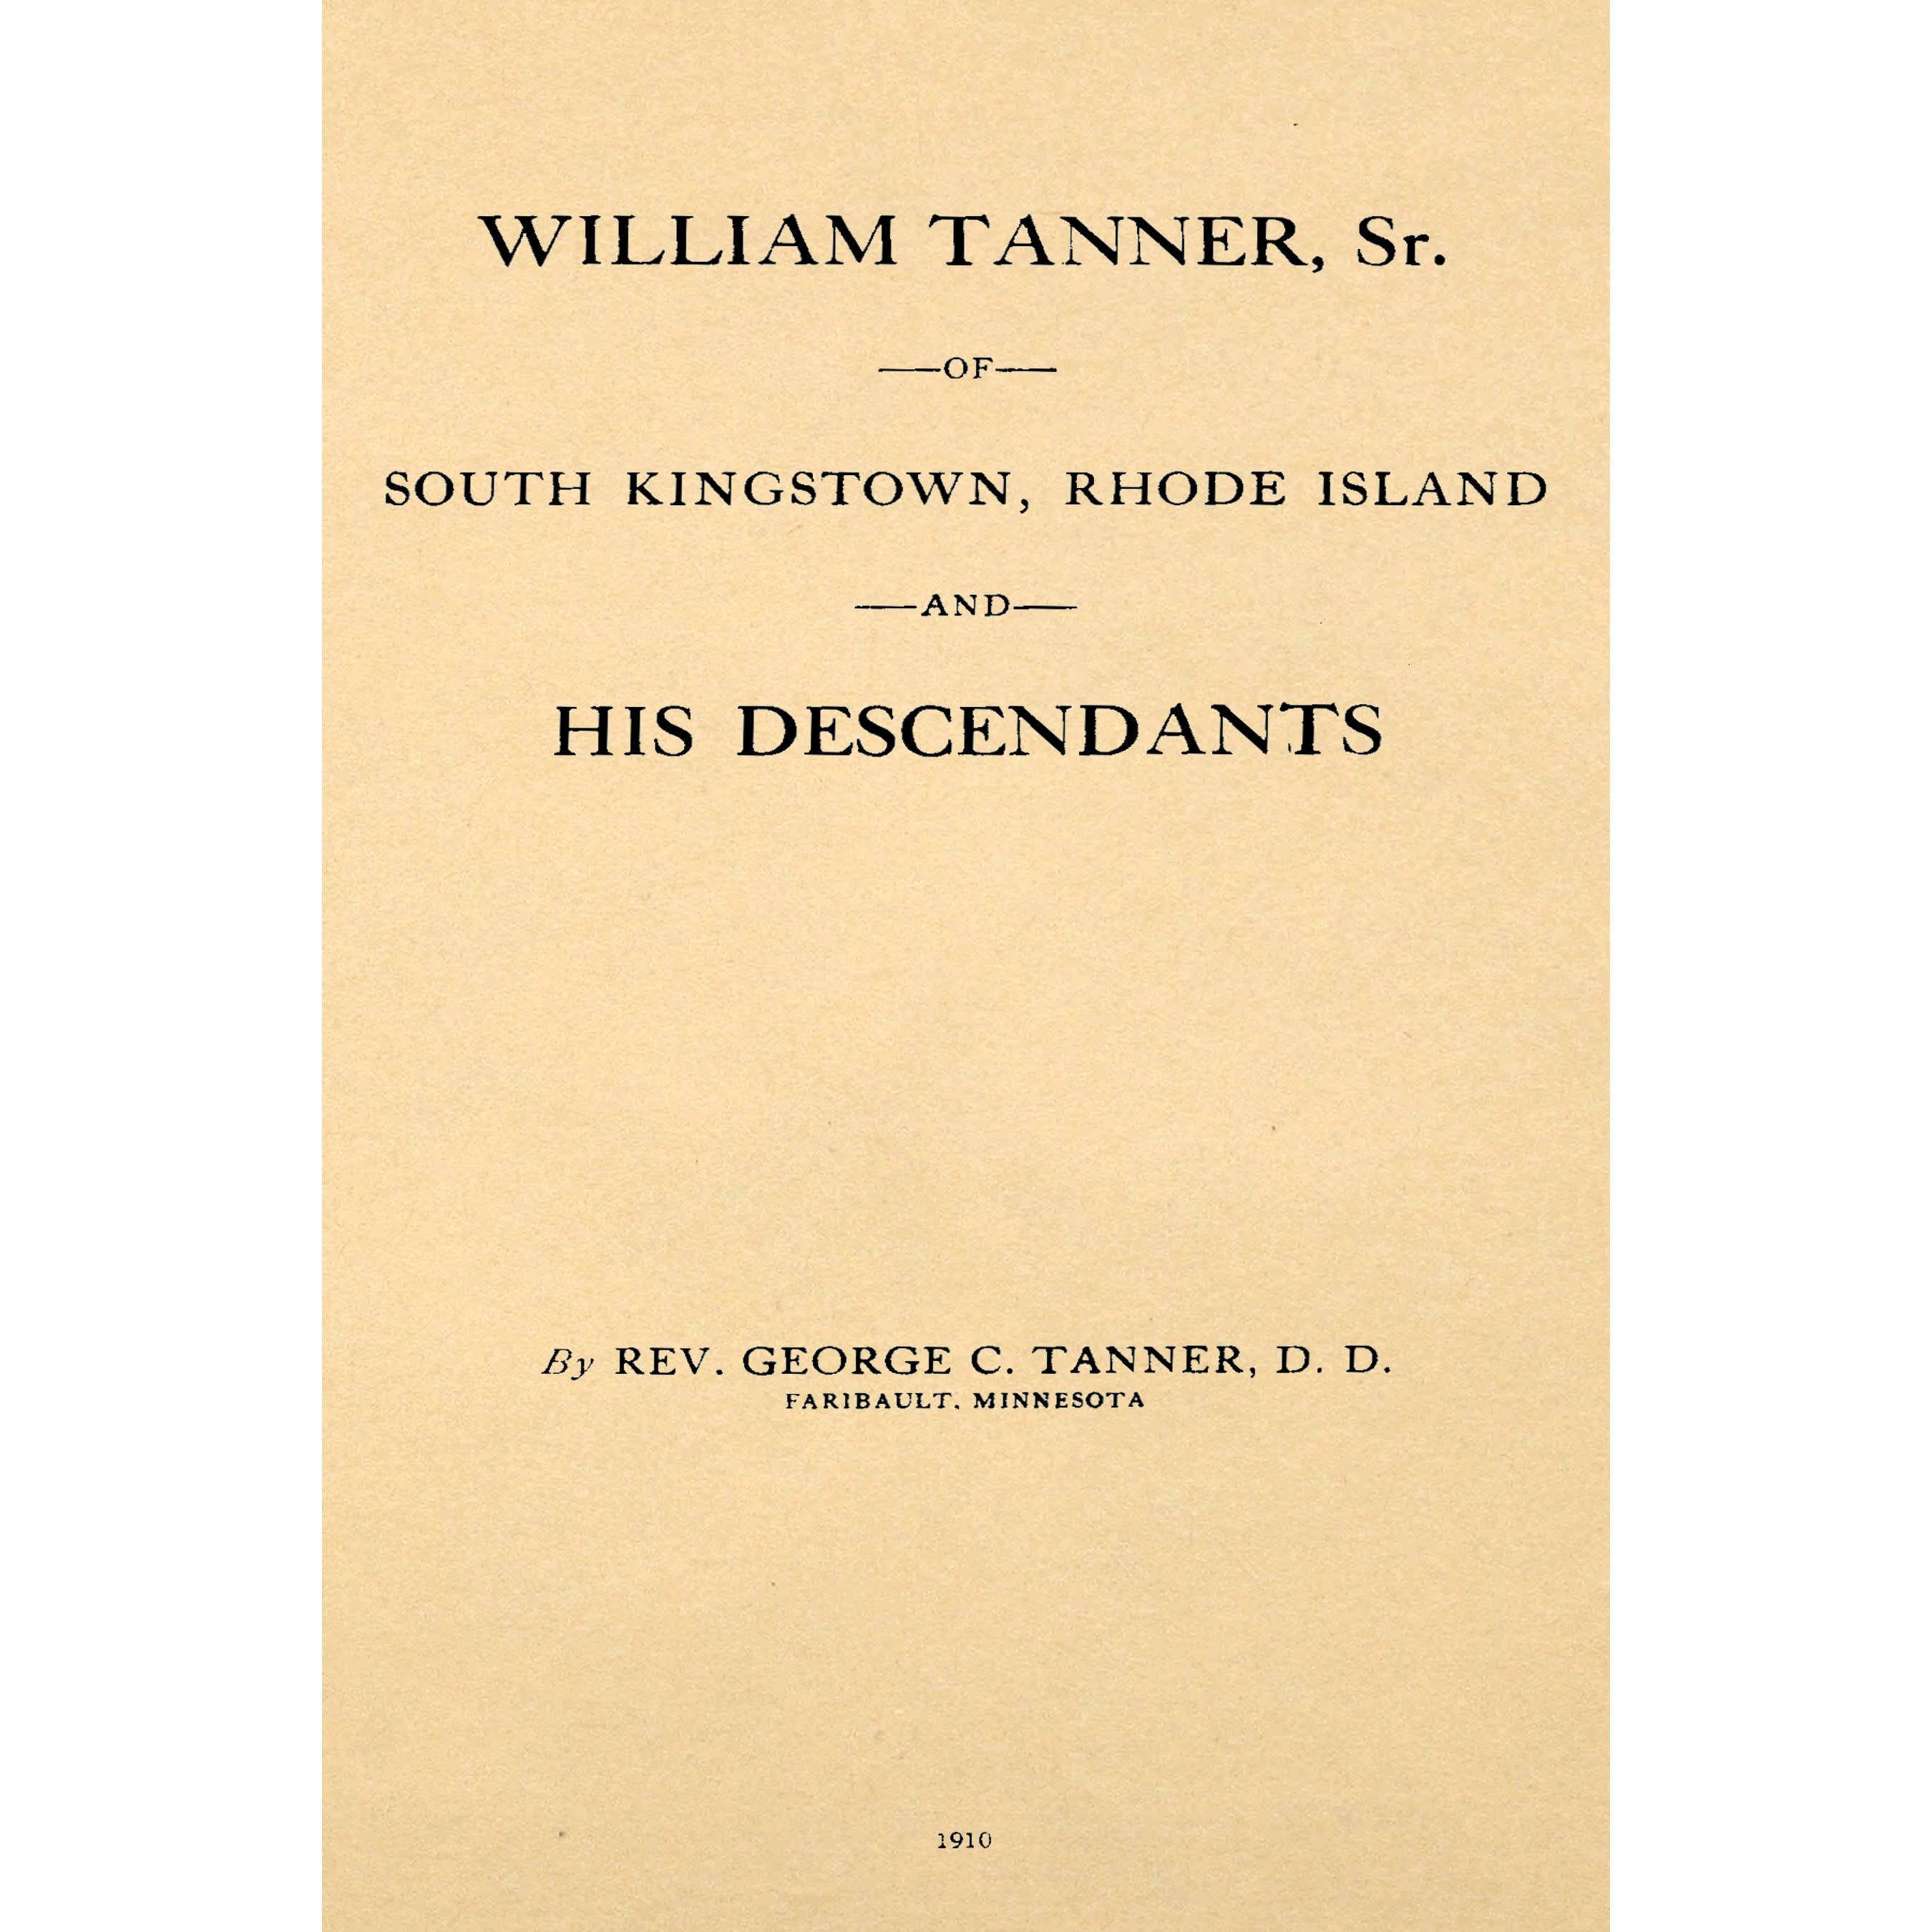 William Tanner, Sr. of South Kingstown, Rhode Island and his Descendants in four parts